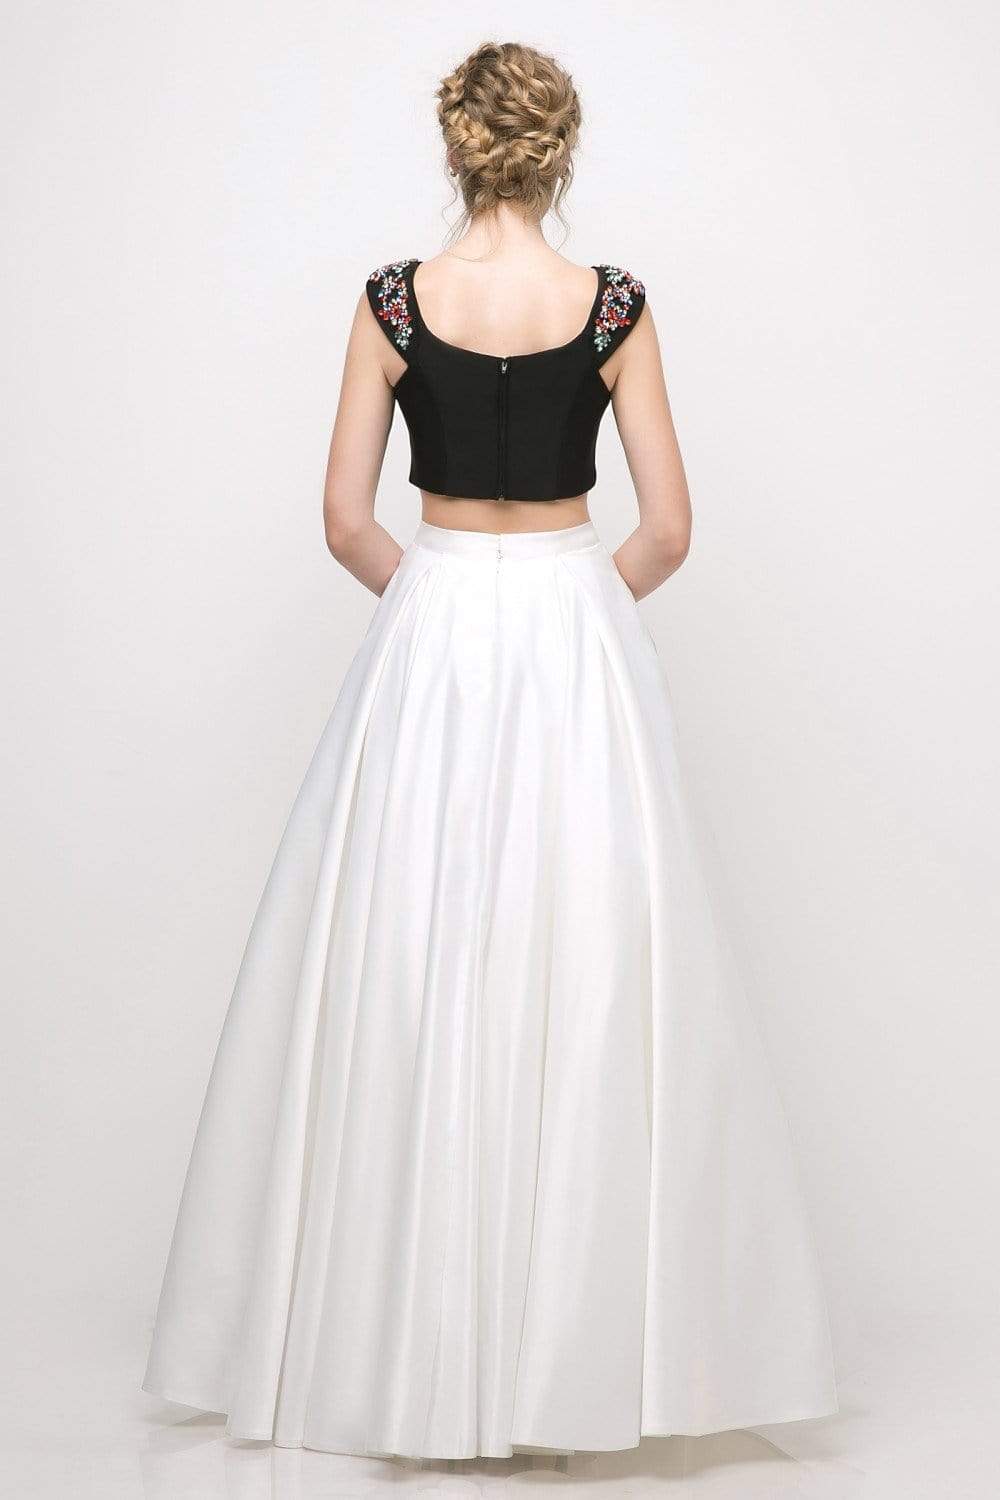 Cinderella Divine - CA316 Two-Piece Beaded Cap Sleeve Ballgown Special Occasion Dress